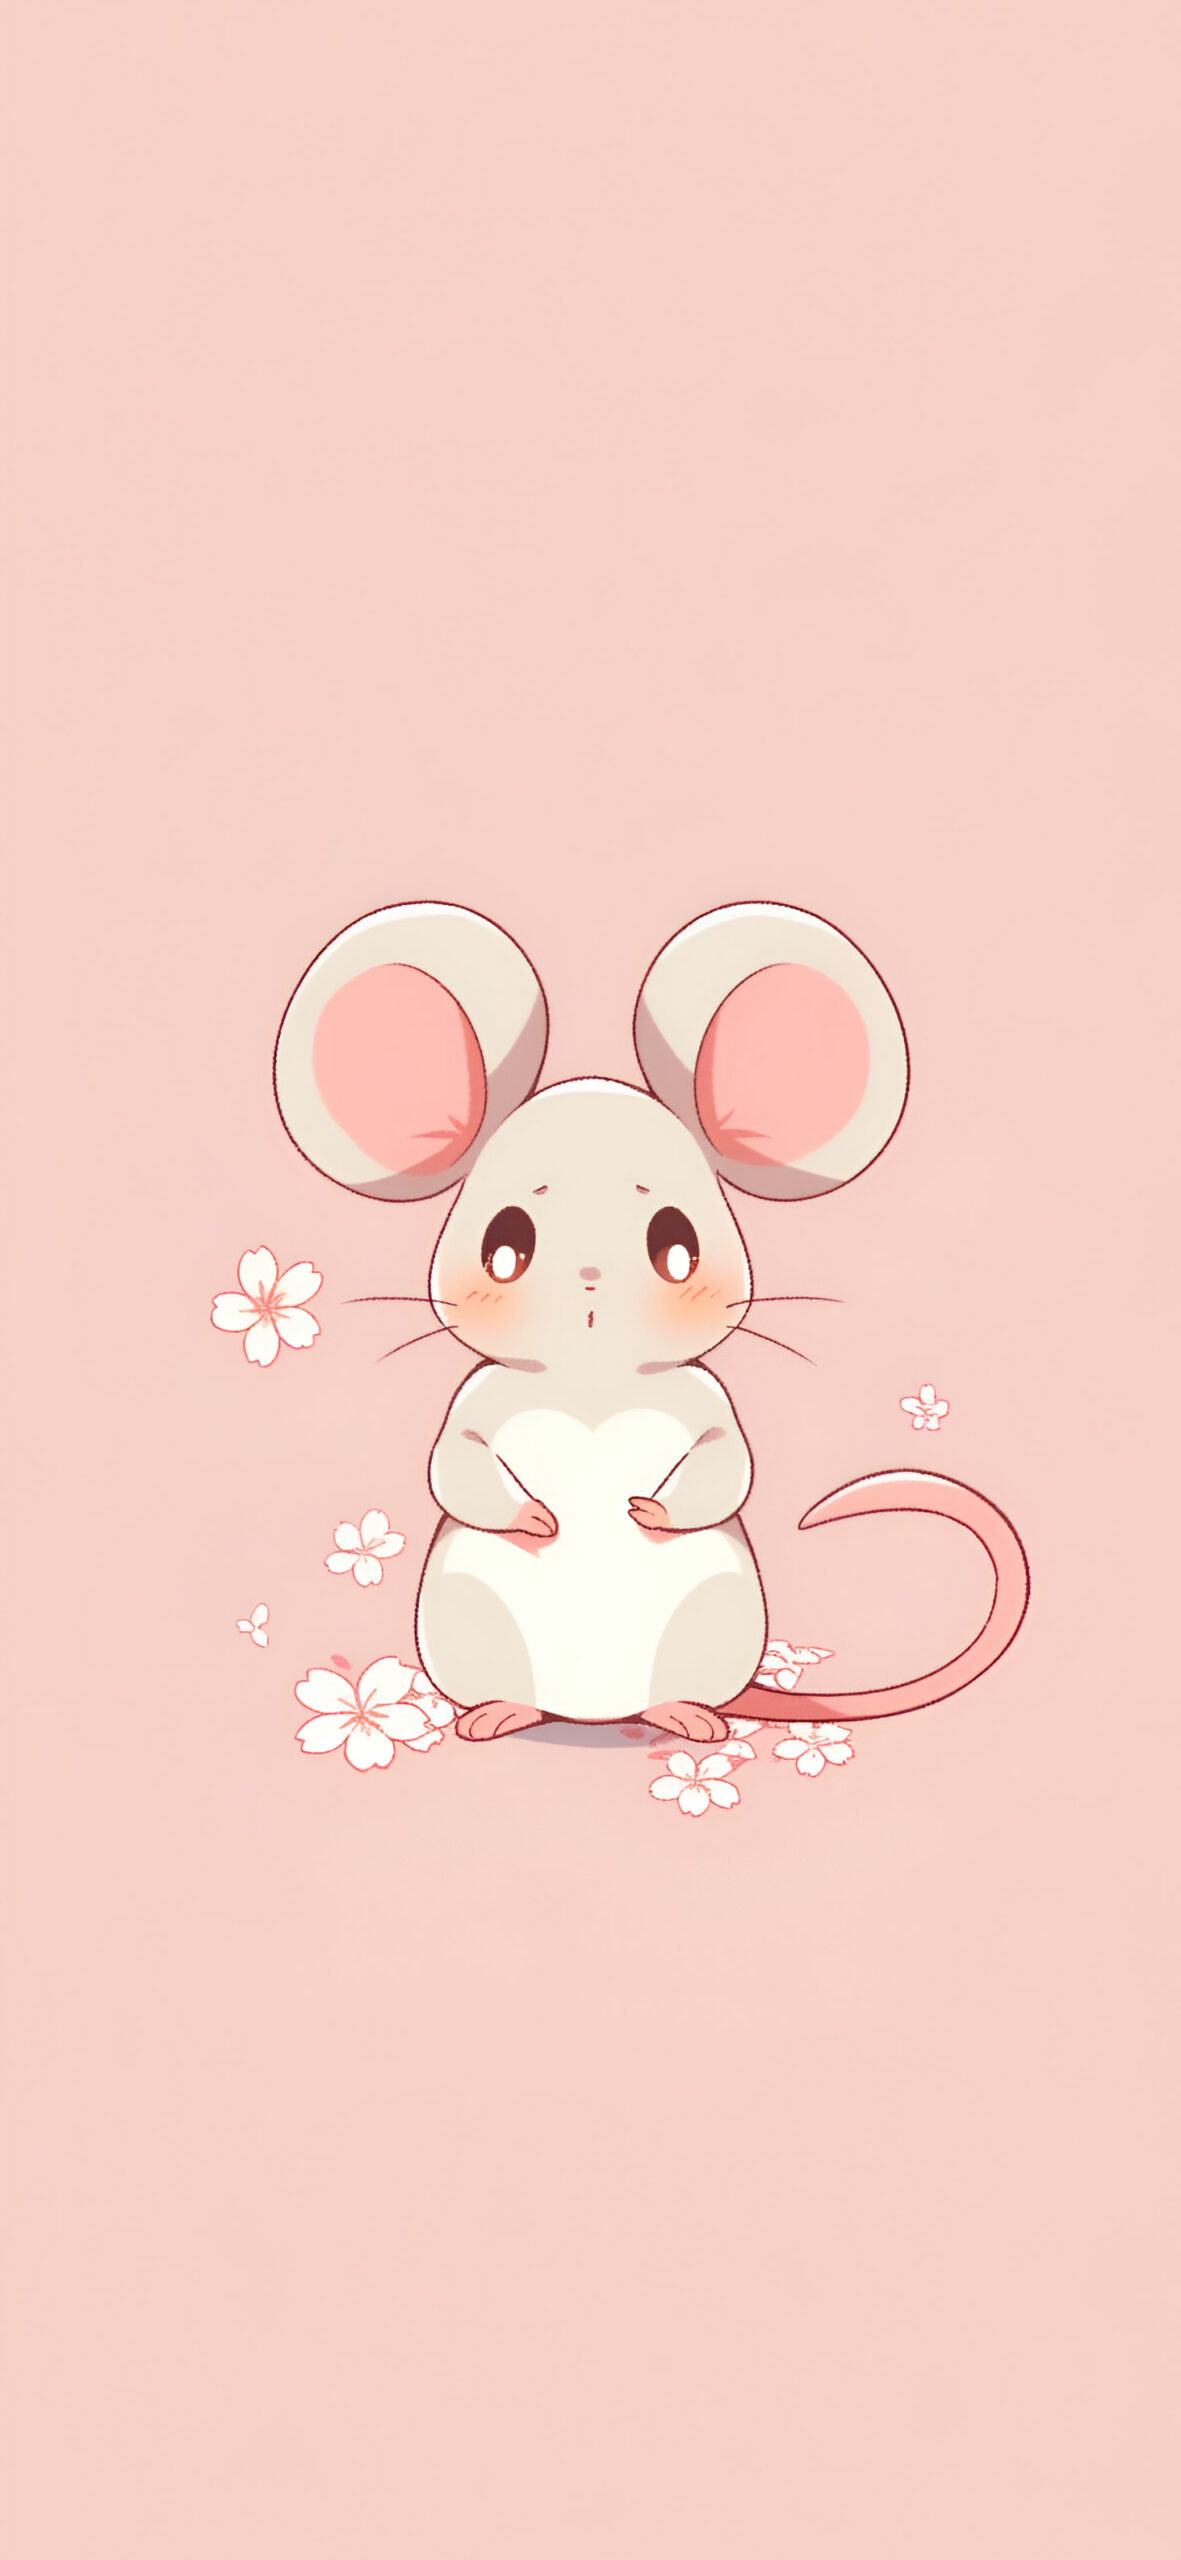 Startled little mouse beige wallpaper Cute rodent aesthetic wa